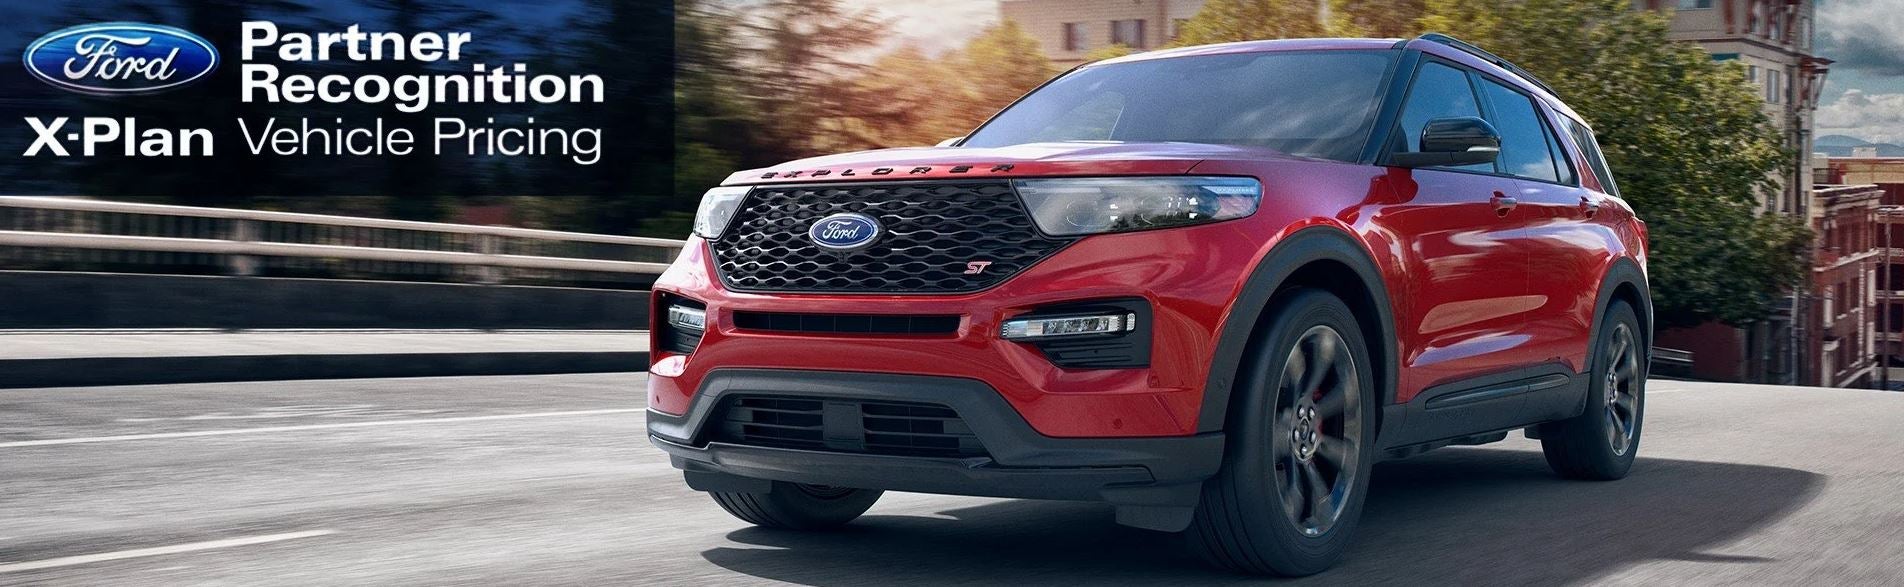 Ford AXZD Plan | Key Scales Ford Inc in Leesburg FL